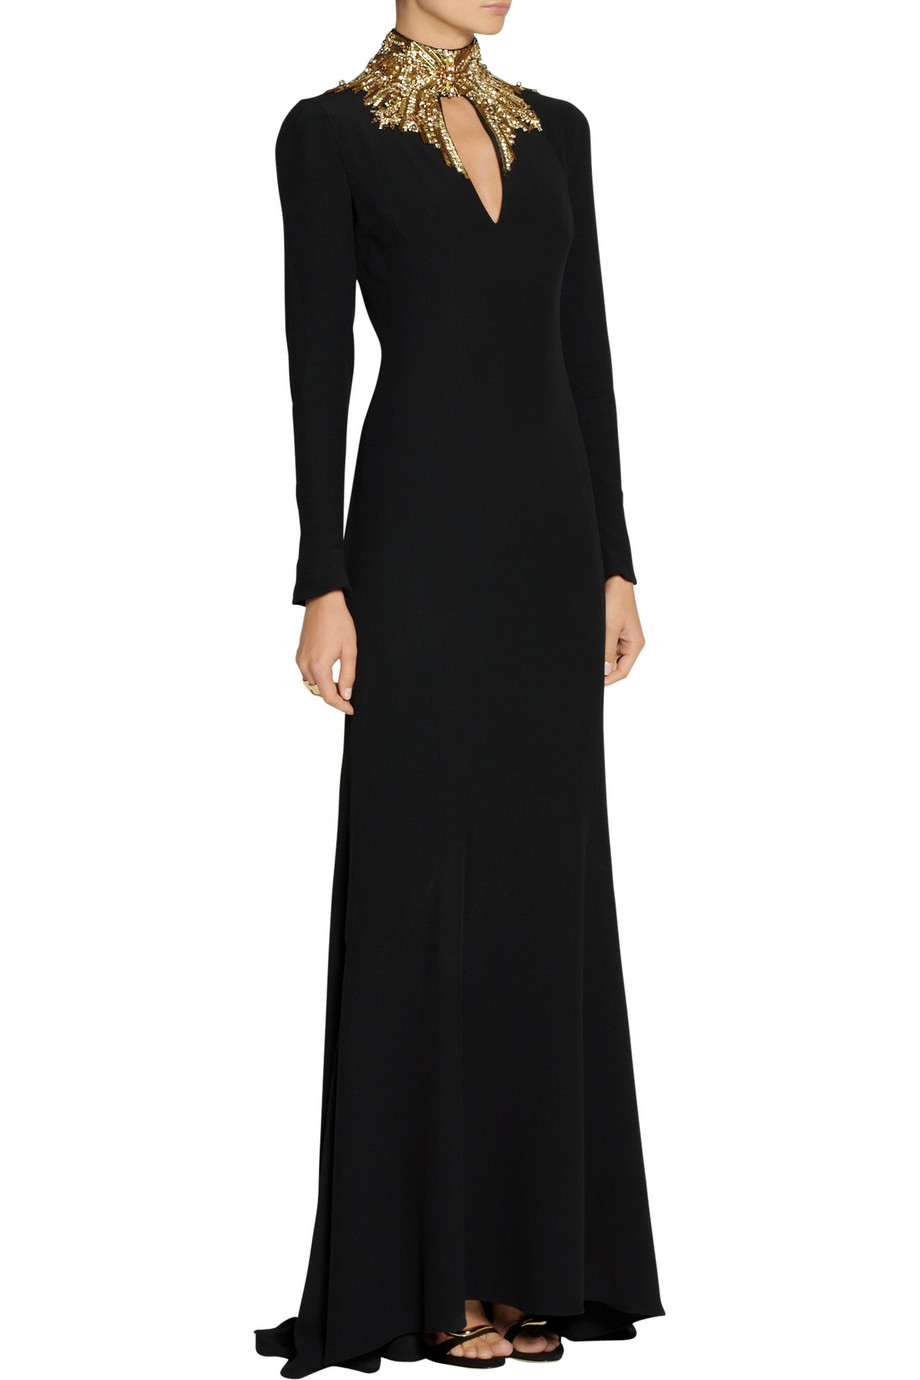 Alexander McQueen Embellished Cutout Crepe Gown in Black - Lyst